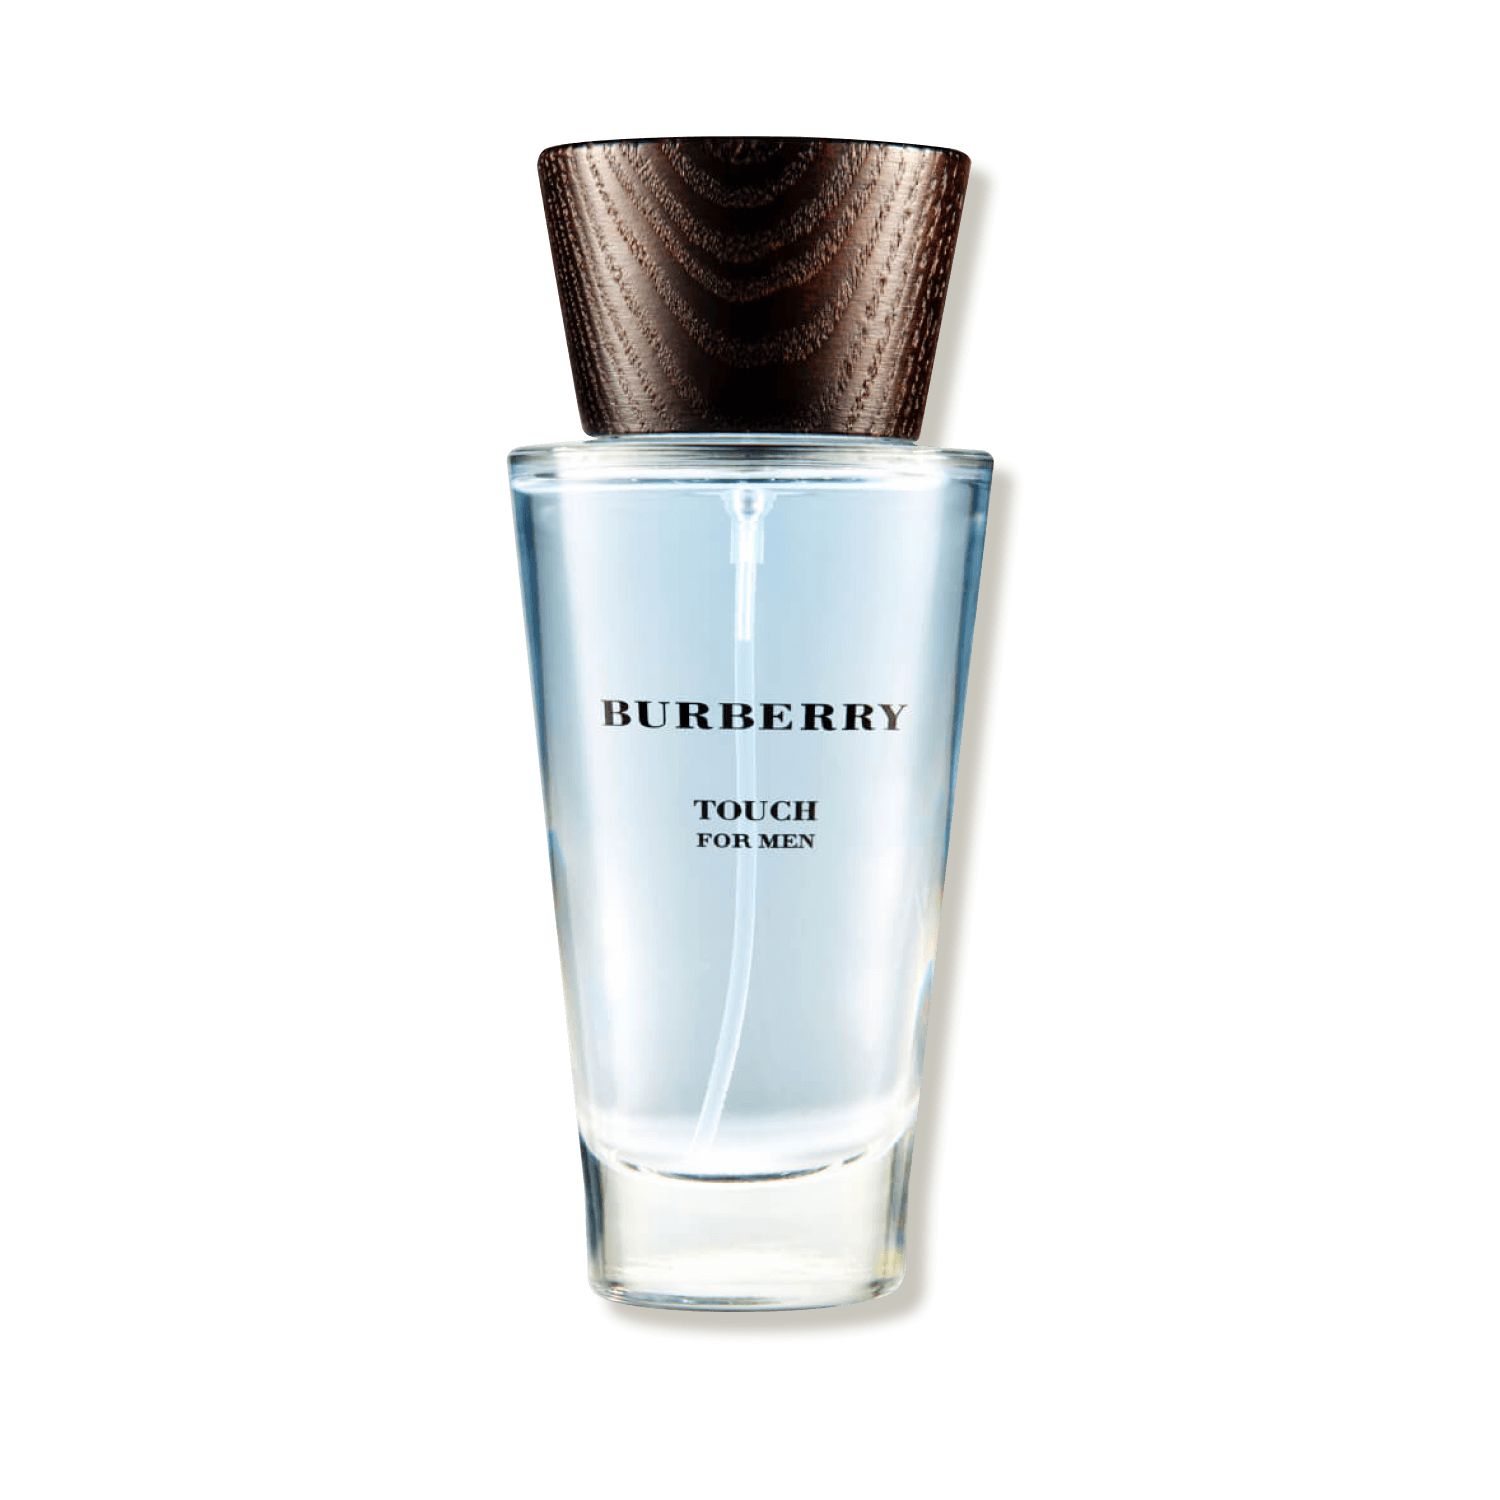 Buy BURBERRY Burberry Touch Scentbird at for for Men